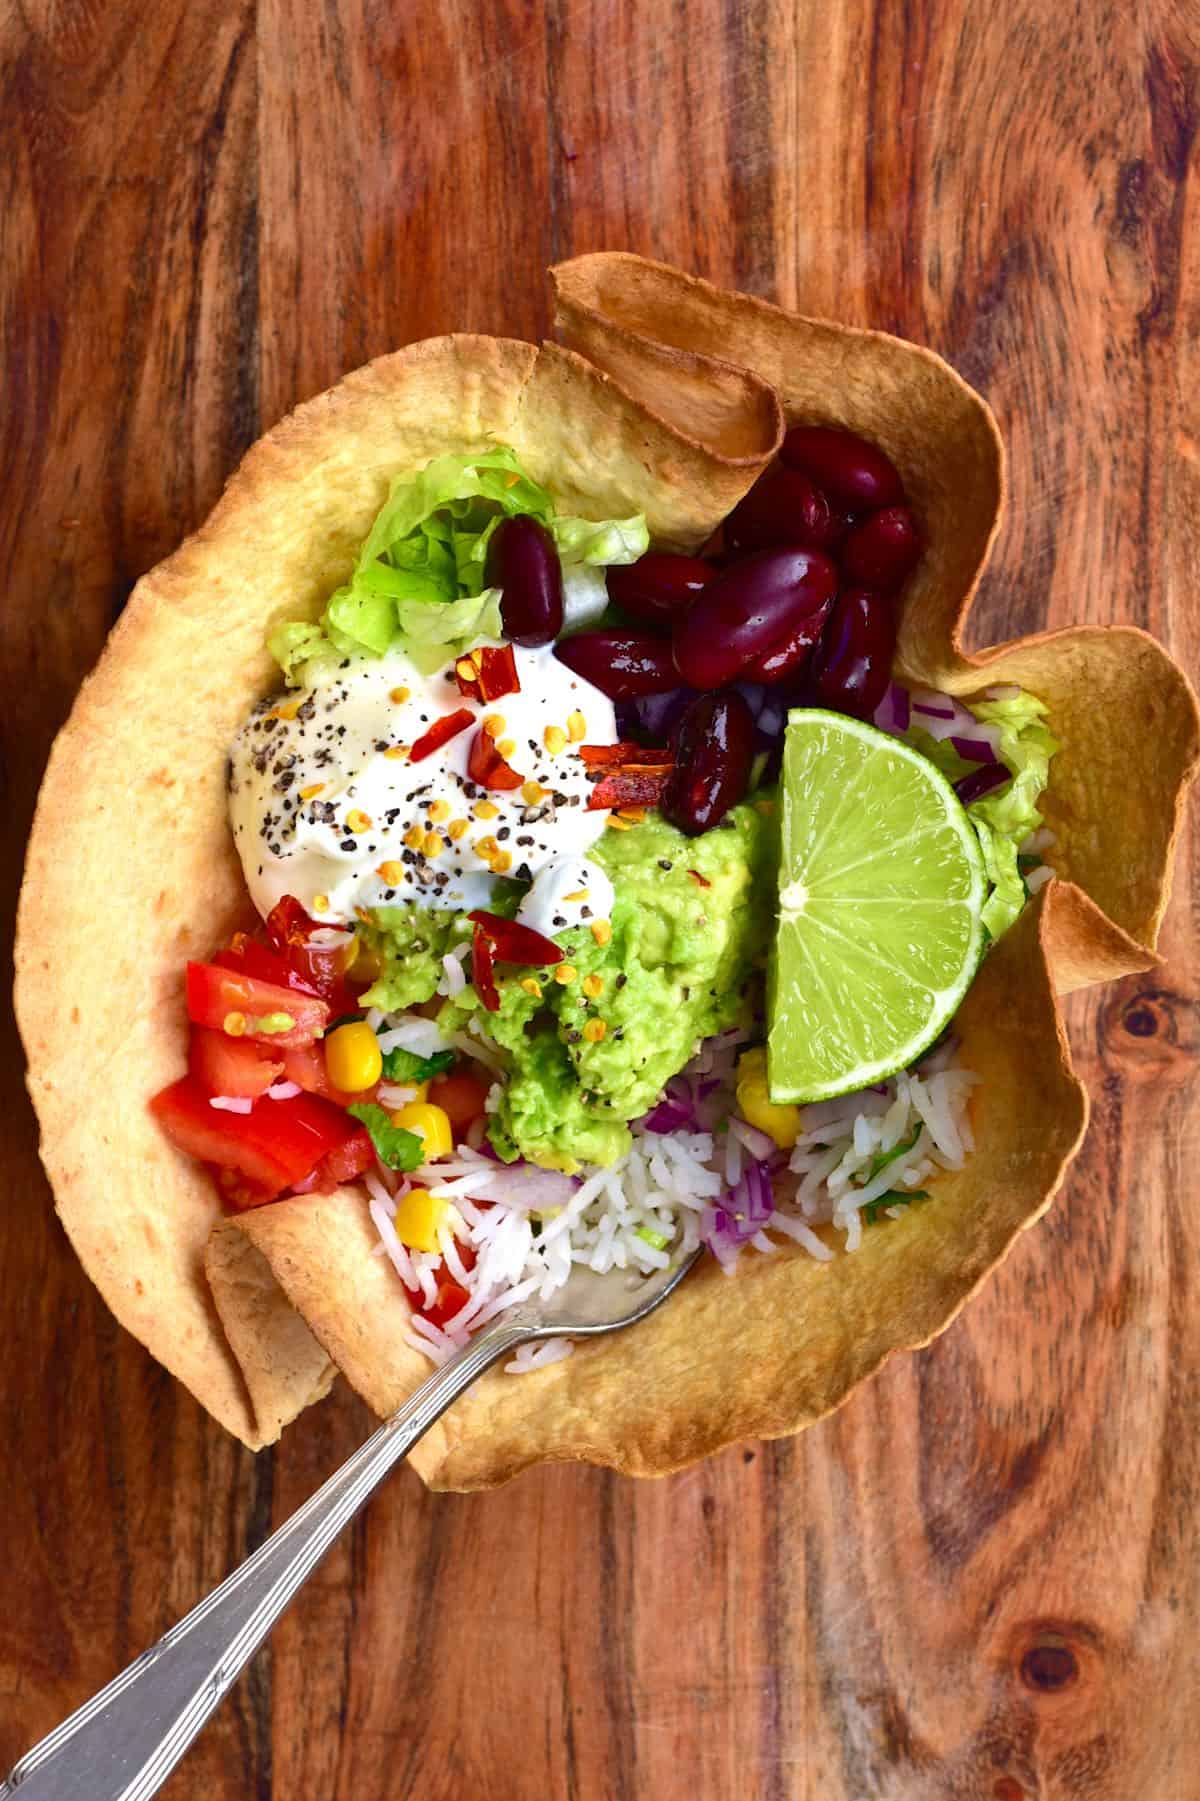 A toasted tortilla burrito bowl filled with rainbow veggies and a fork